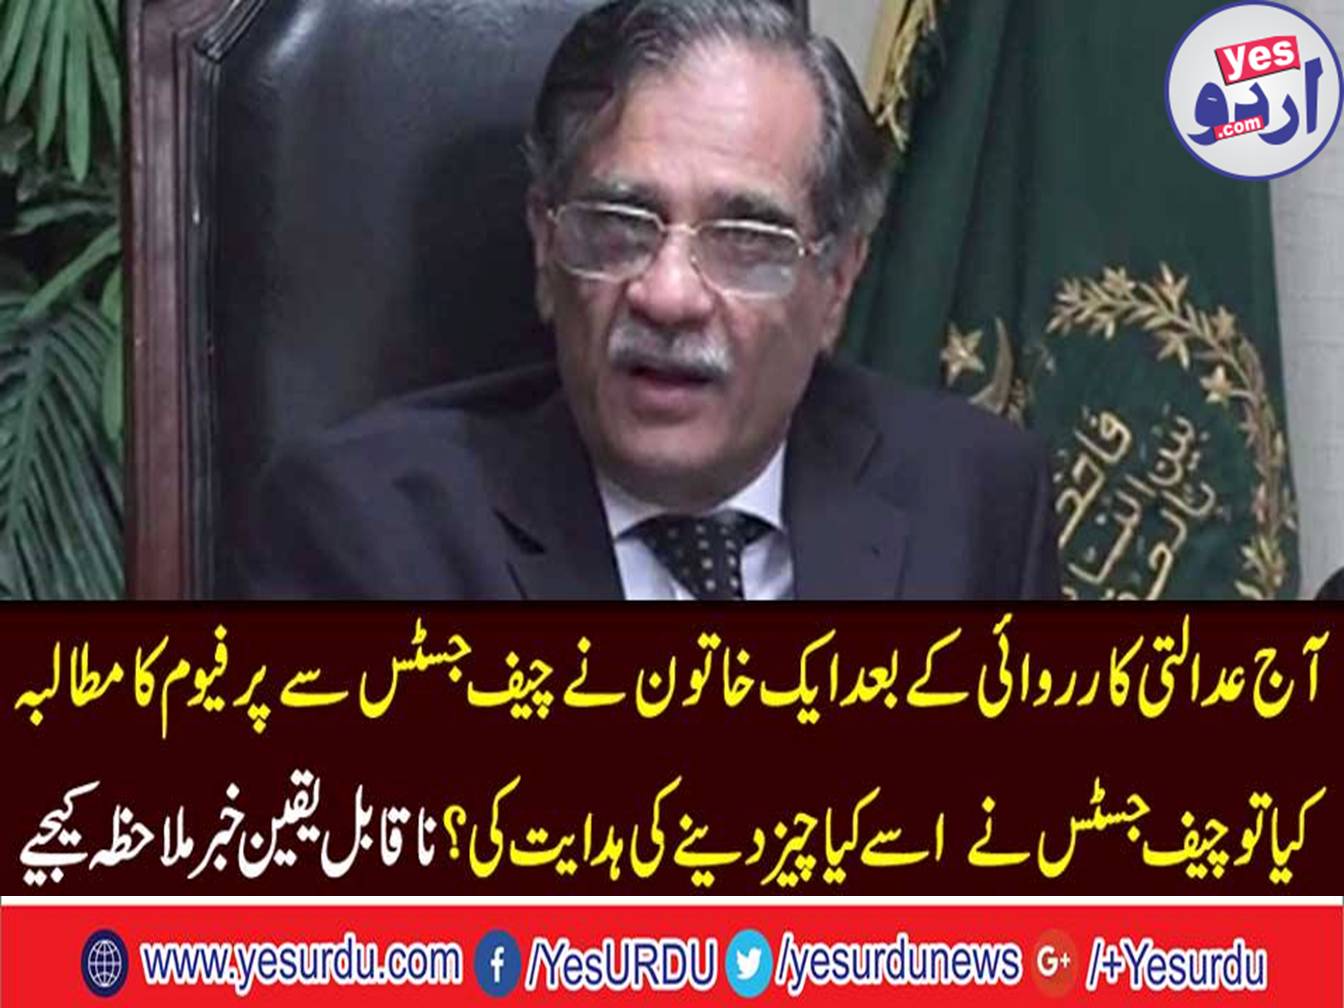 After the court proceedings, a woman demanded perfume from the Chief Justice